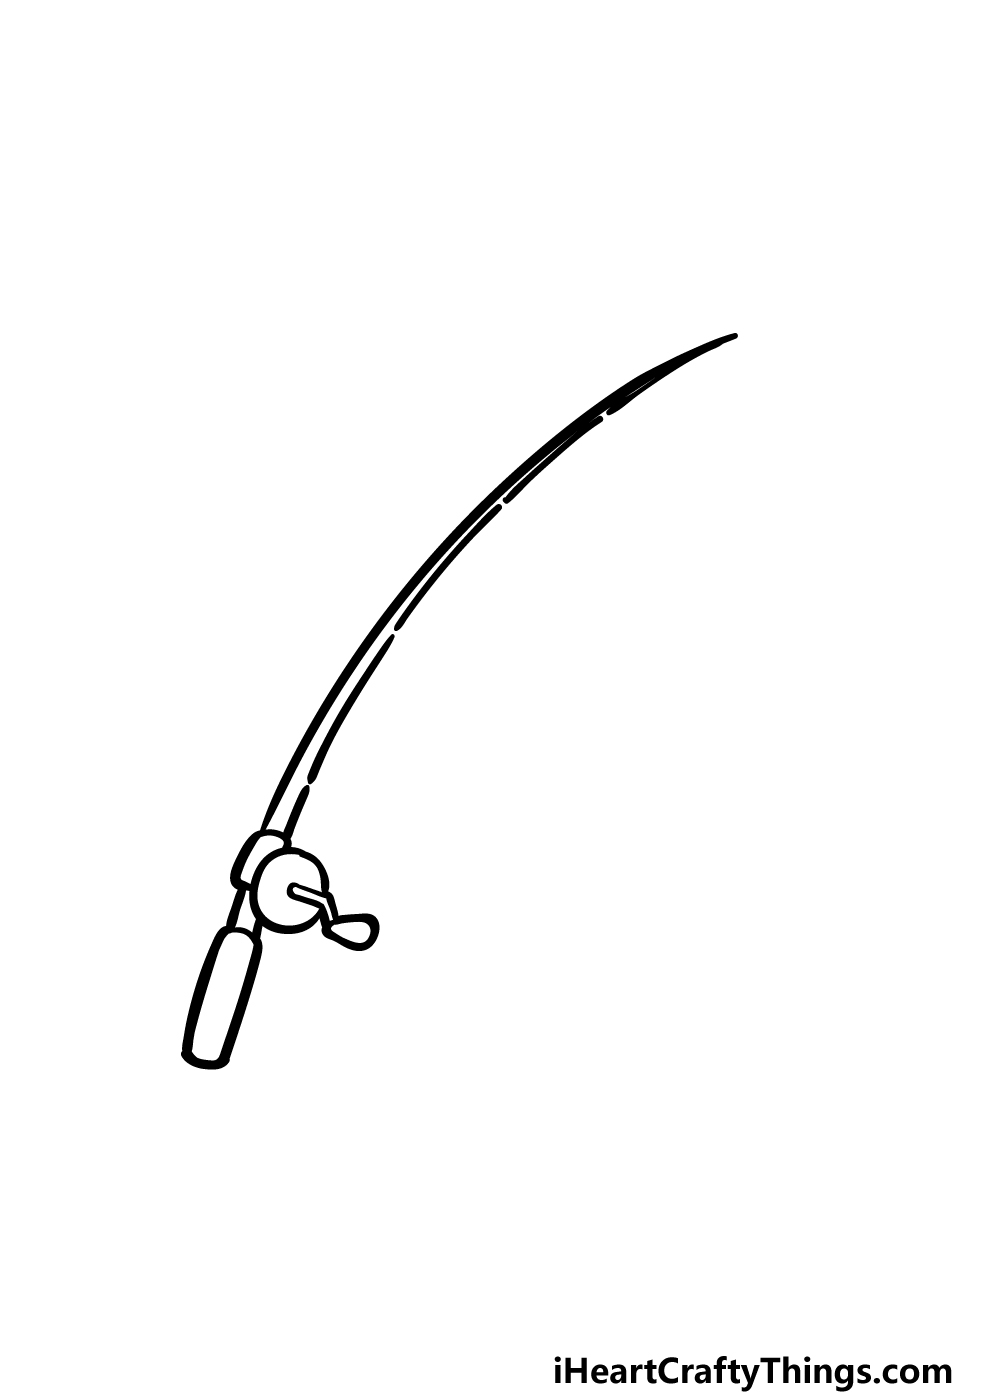 how to draw a fishing pole step 3